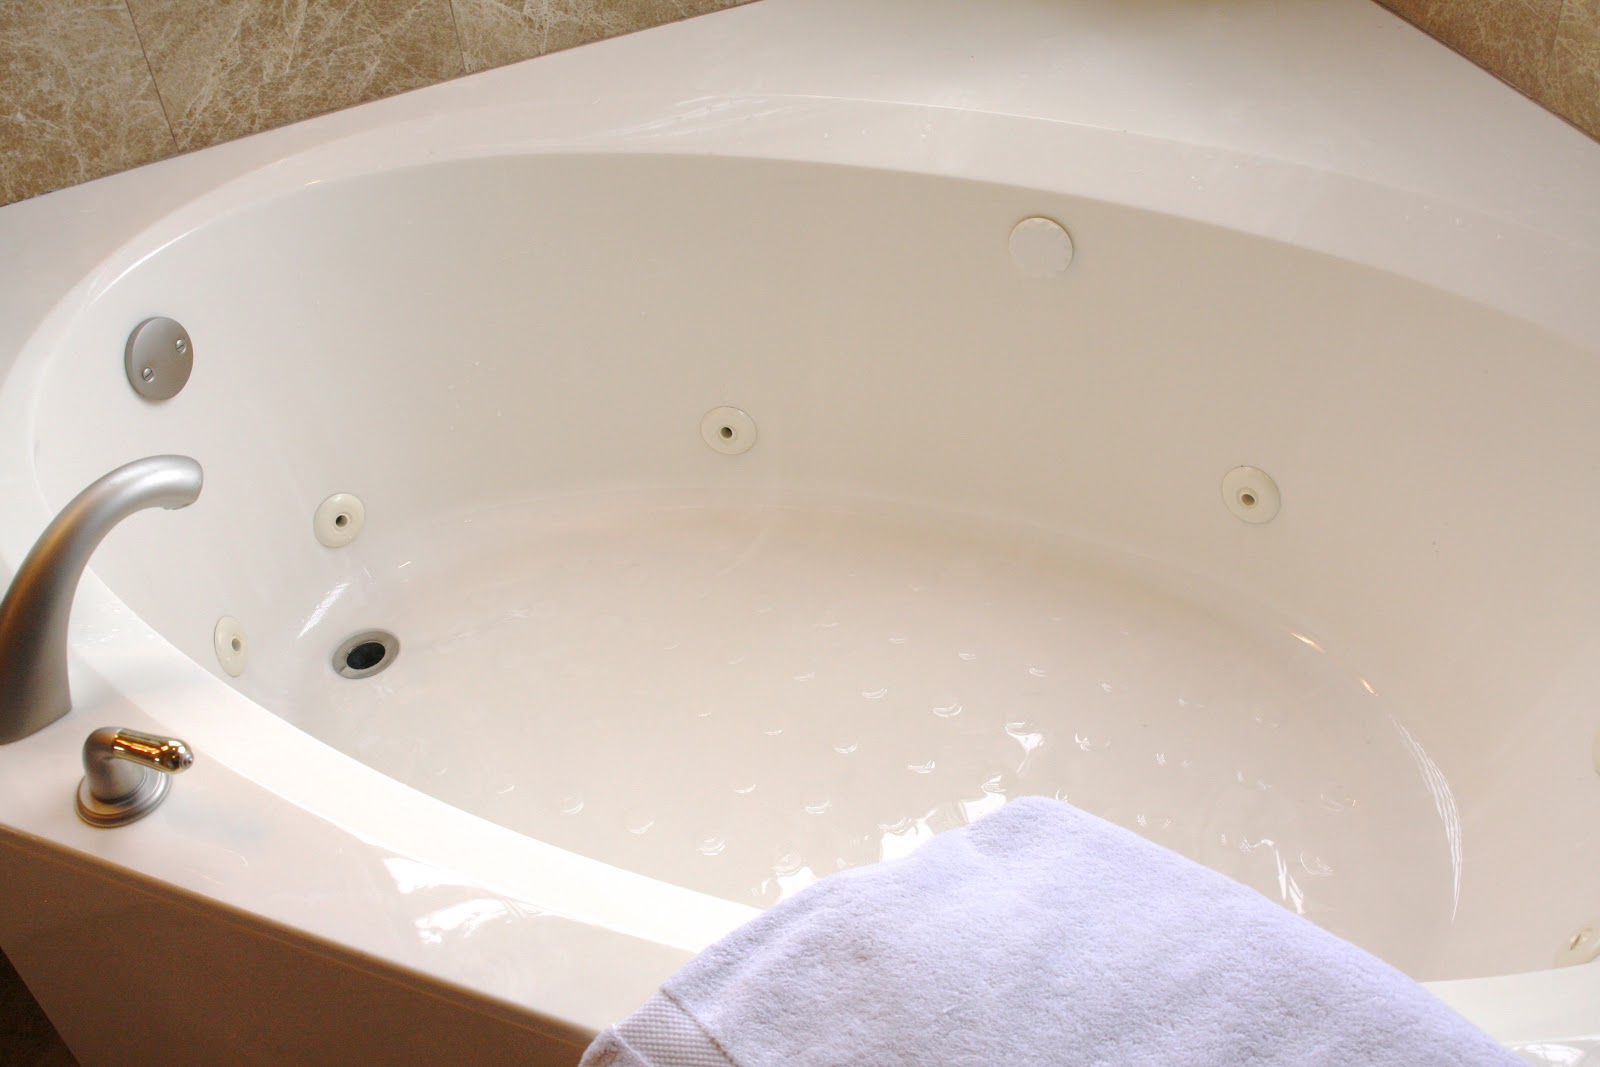 How To Clean Whirlpool Tub Jets, How To Remove And Clean Bathtub Jets